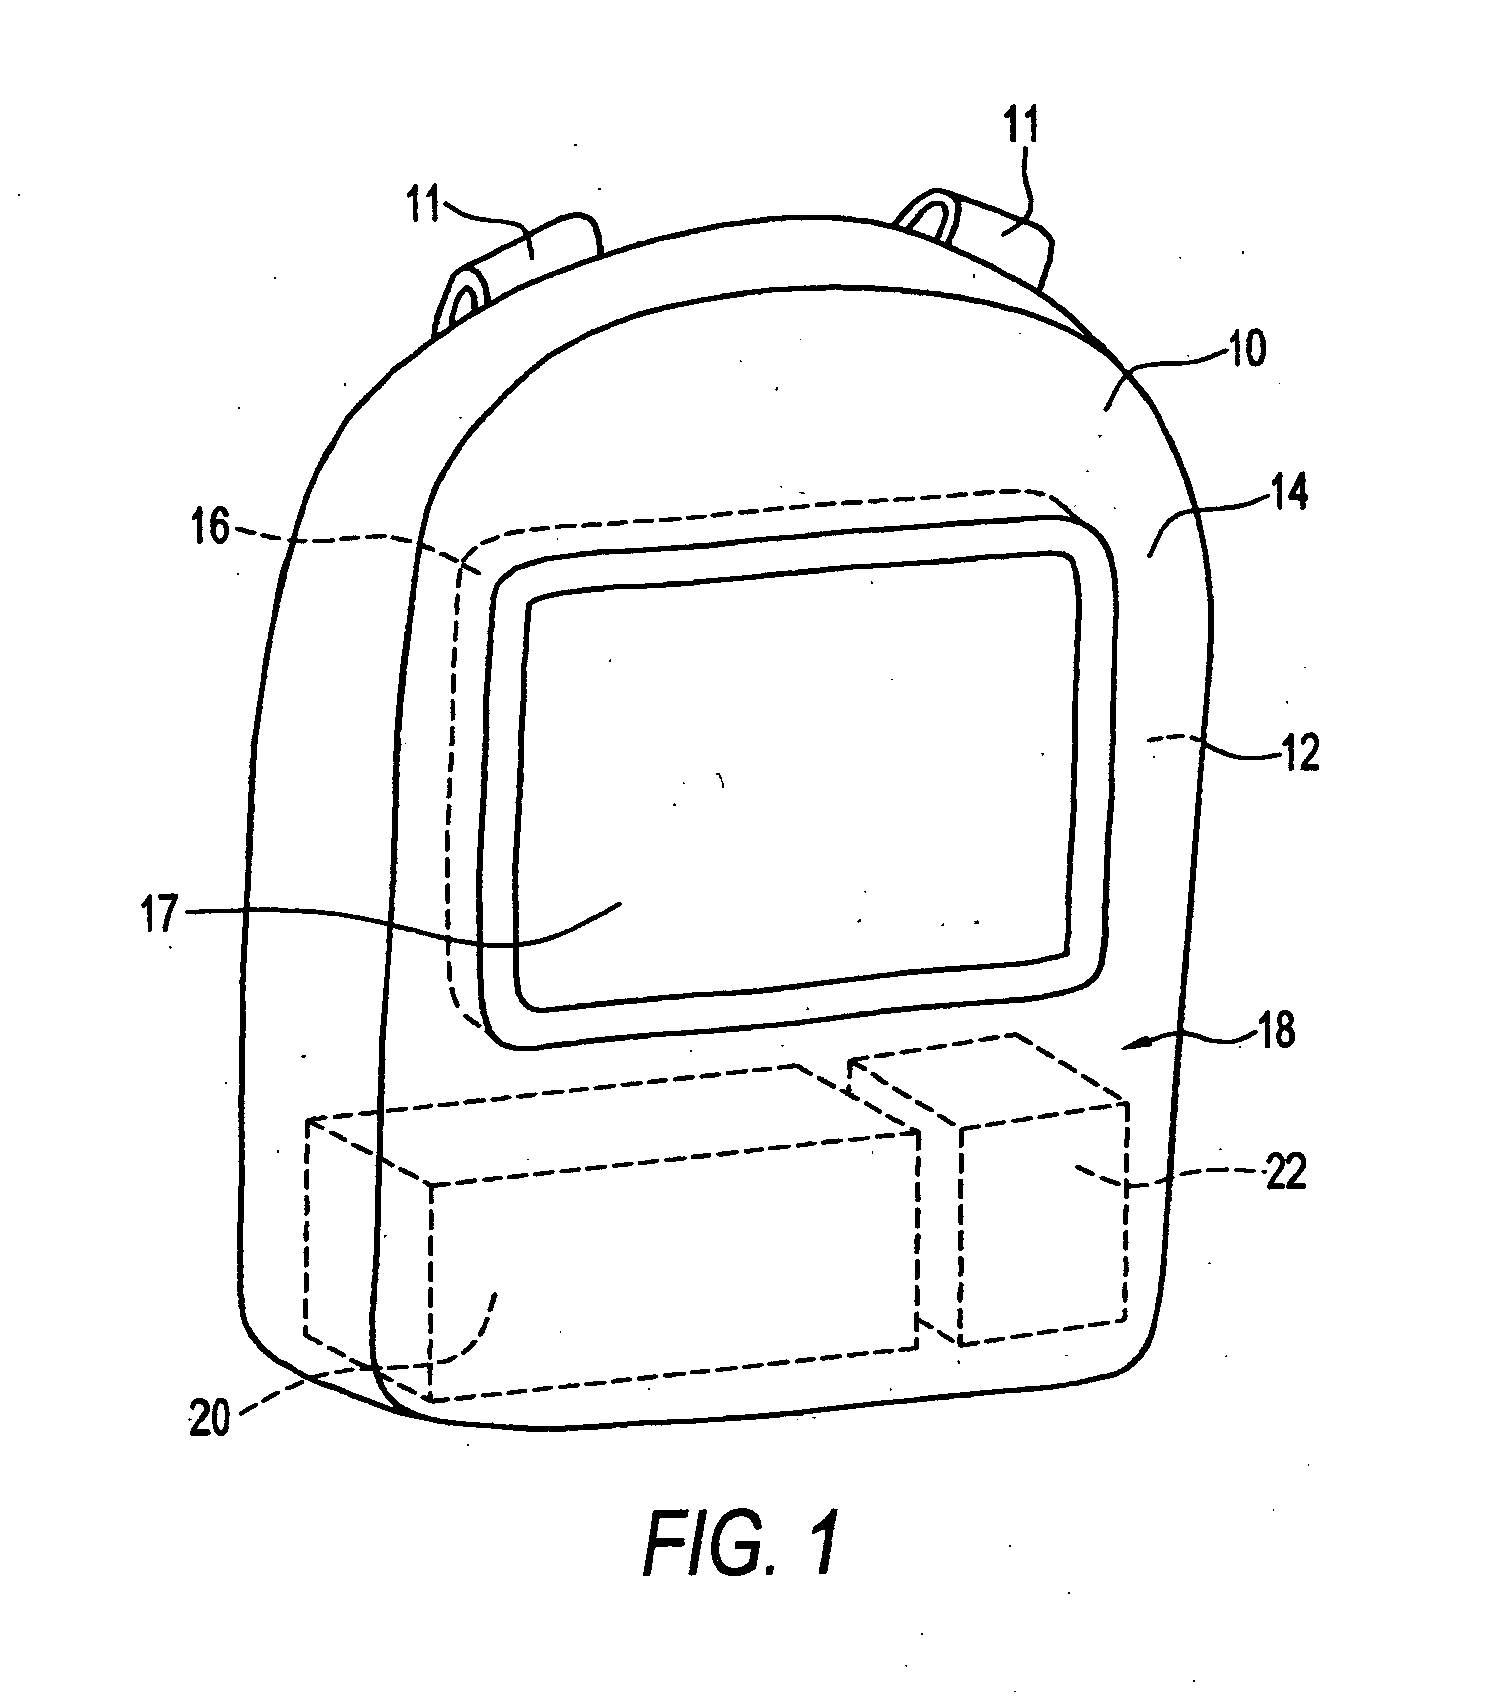 Method and apparatus for advertising using portable flat screen video equipped backpacks